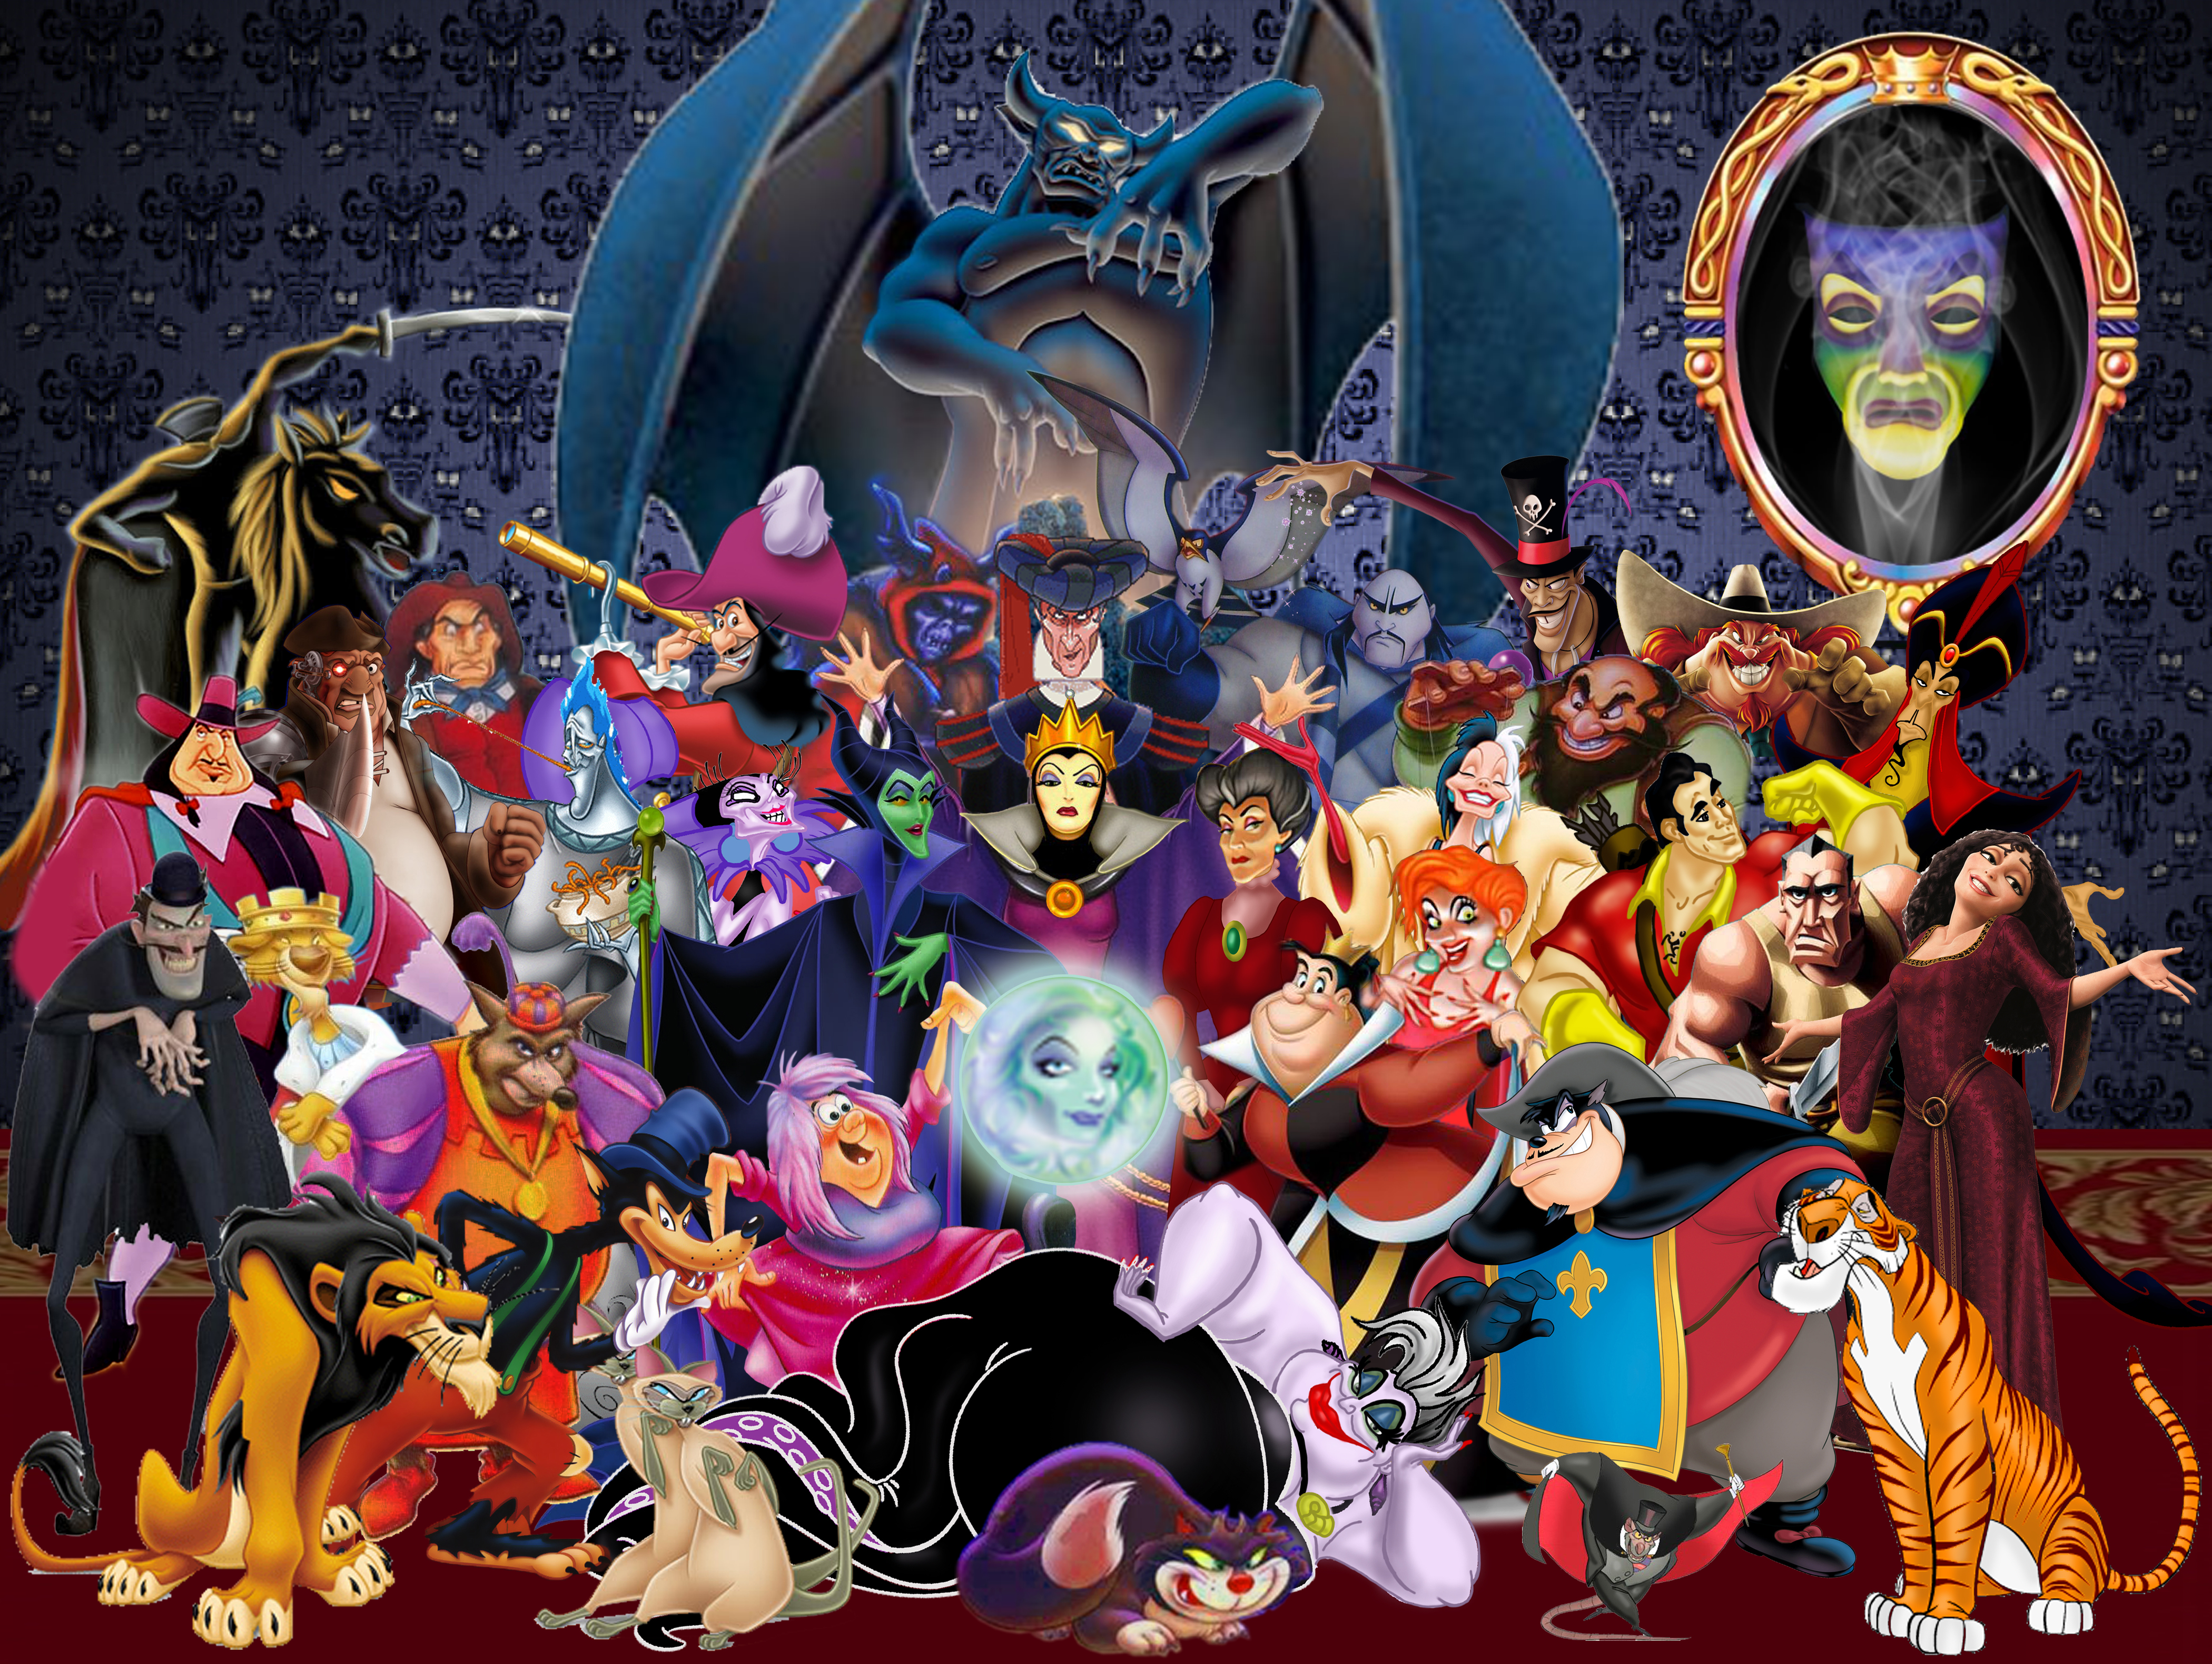 The Best Disney Villains Reviewing All 56 Disney Animated Films And More